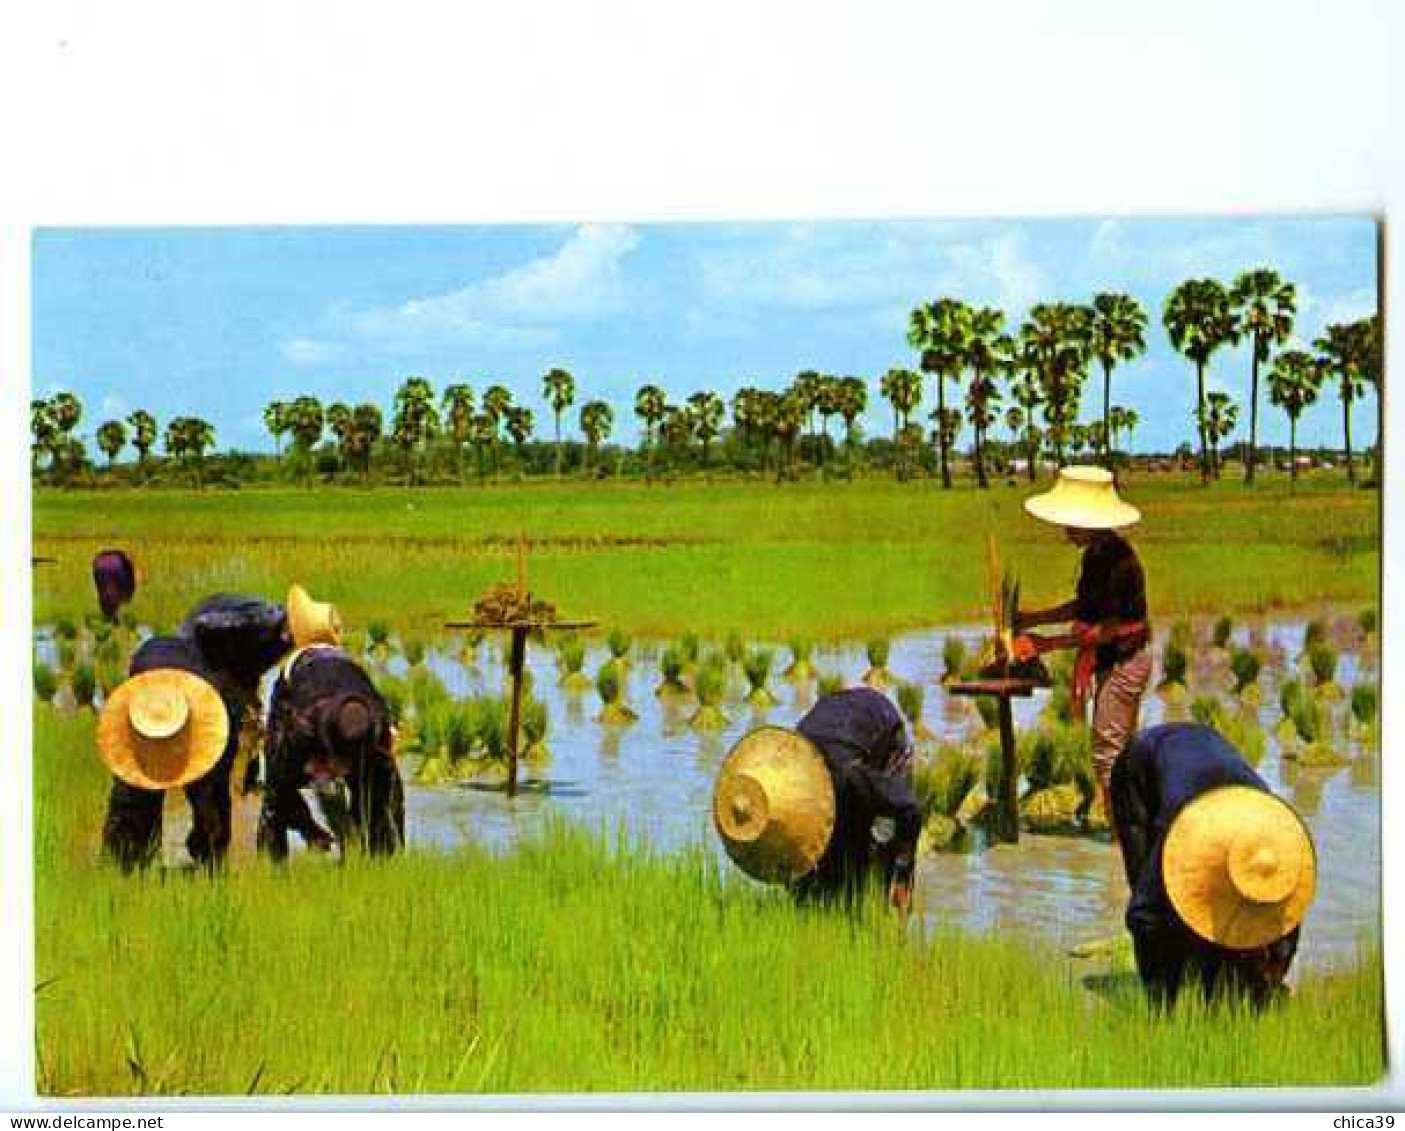 011859  -  Farmers Root Out Young Rice Plants, Binding Them Into Sheaves For Transplanting In The Farm - Thaïlande